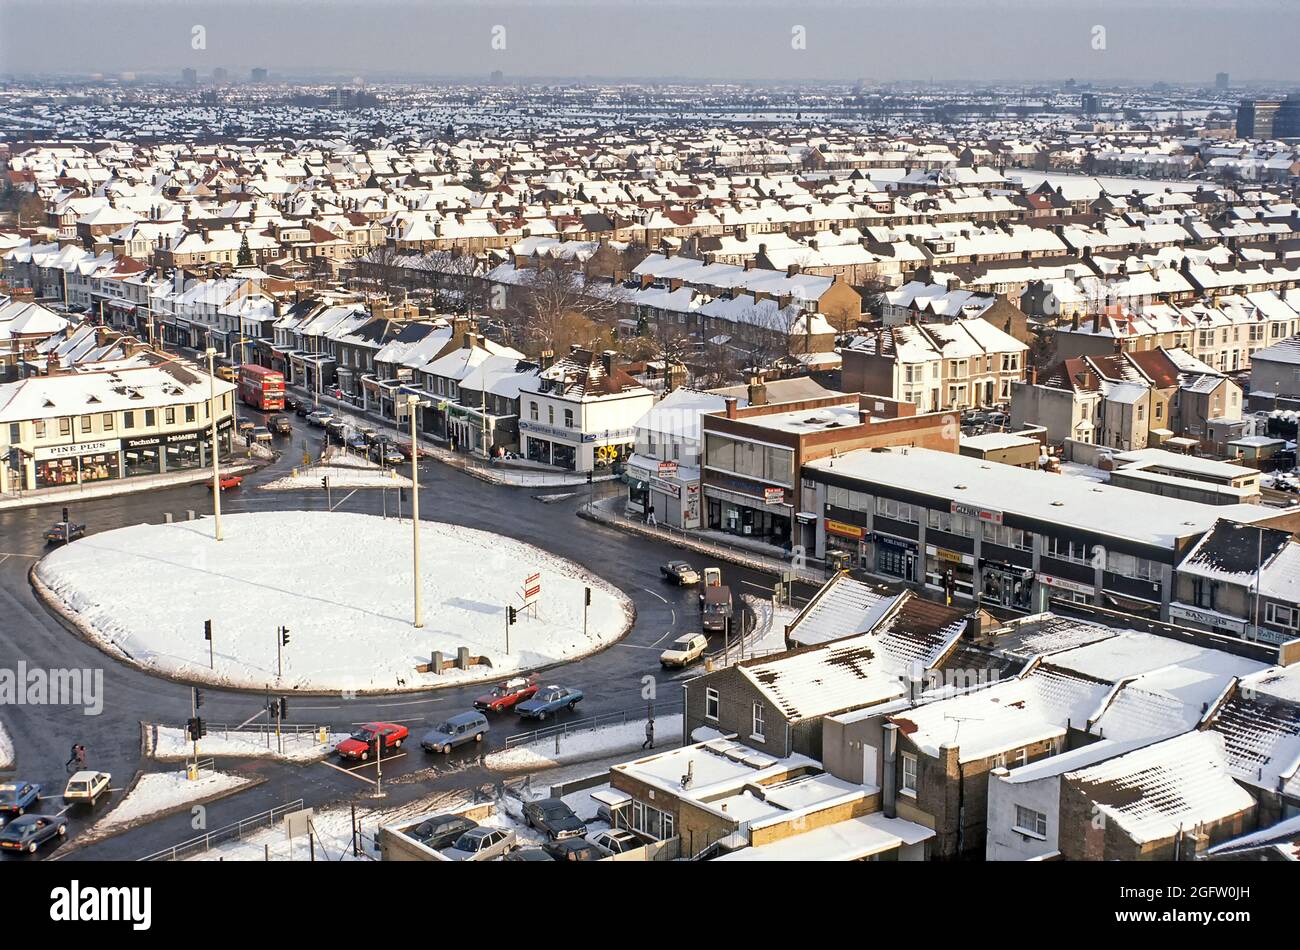 Archive 1991 winter sunshine in aerial view of treated road traffic roundabout junction at Fanshaw Lane and Longbridge Road with snow covered 1990s housing roof tops beyond in this densely populated 90s archival image of an urban landscape in the town of Barking in East London England UK Stock Photo